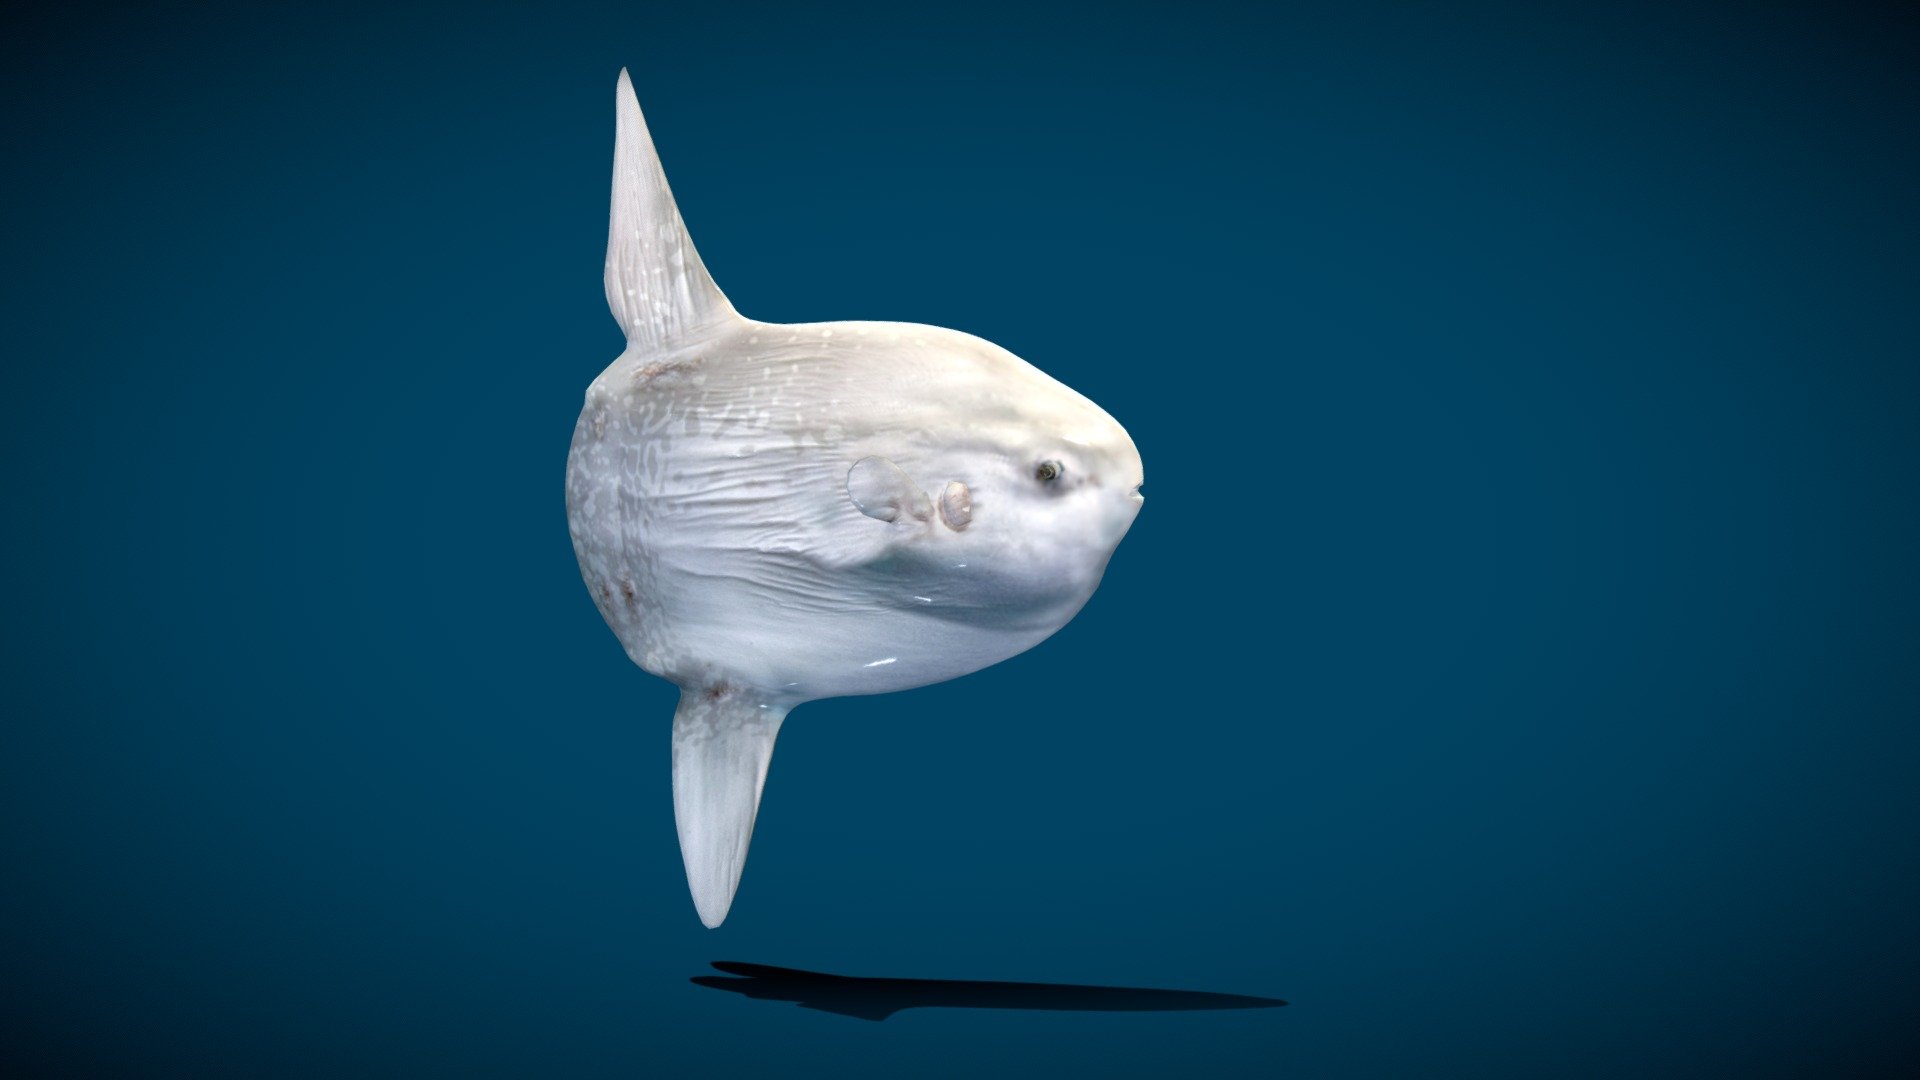 *** Idle animation





Lowpoly







4K PBR Textures Material**




A sunfish, also called a mola, is any fish in the genus Mola. The fish develop their truncated, bullet-like shape because the back fin, with which they are born, never grows. Instead, it folds into itself as the creature matures, creating a rounded rudder called a clavus. Wikipedia
Scientific name: Mola
Domain: Eukaryota
Family: Molidae - Ocean Sunfish Mola - 3D model by Nyilonelycompany 3d model